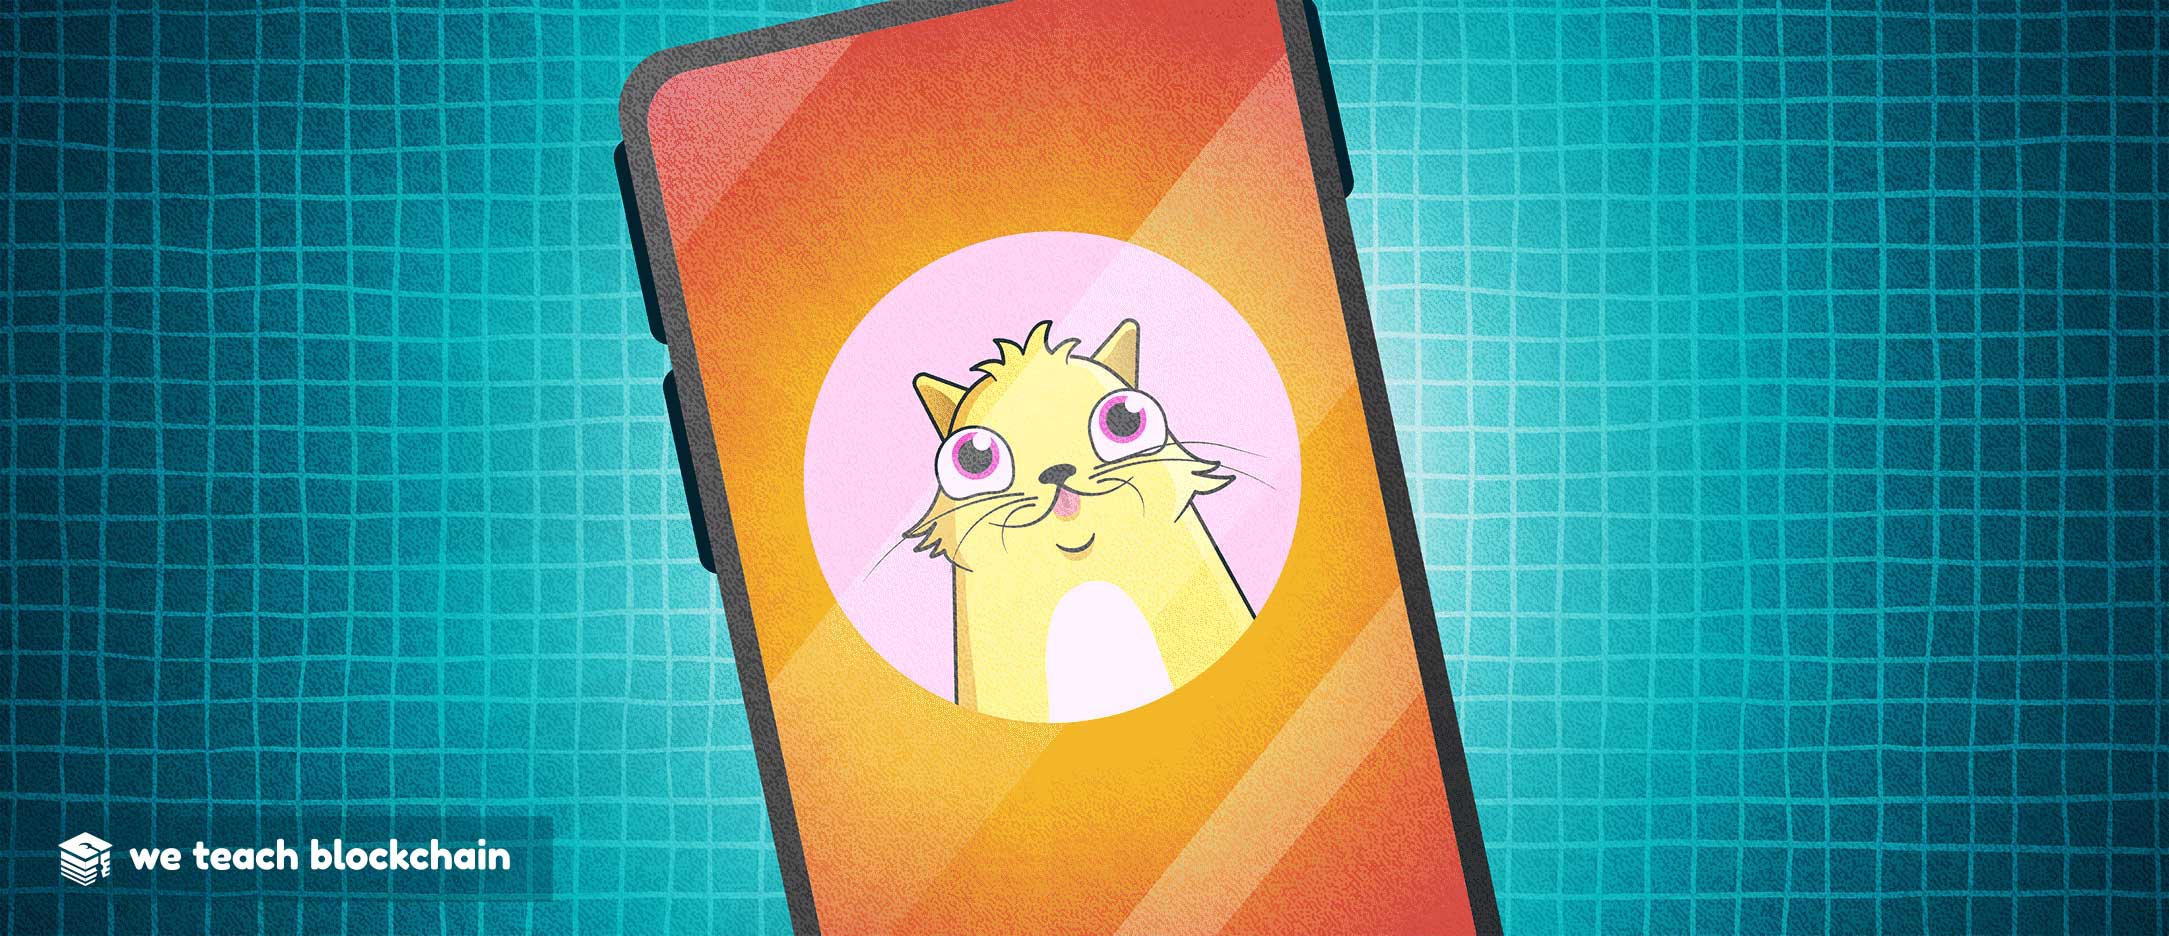 A phone displaying a Cryptokitty